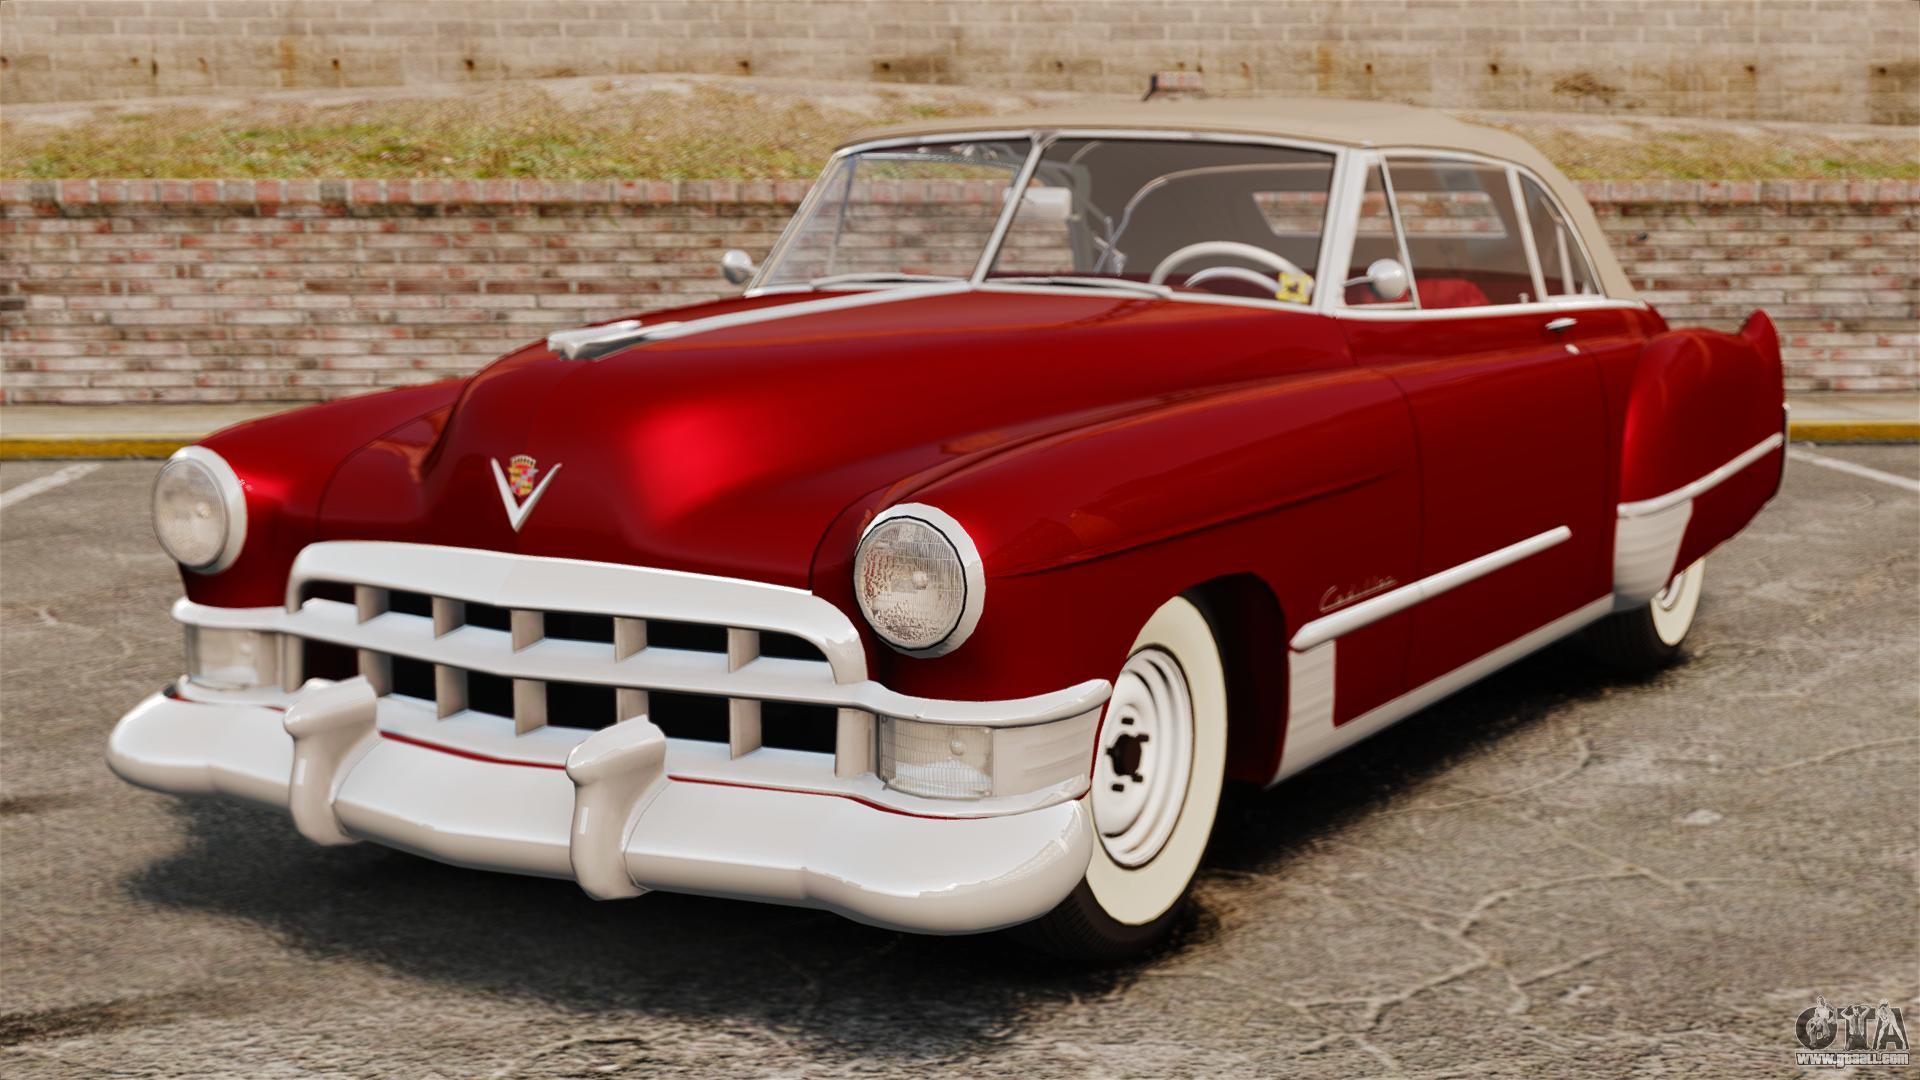 1949 Cadillac Sixty-two Convertible Pics, Vehicles Collection